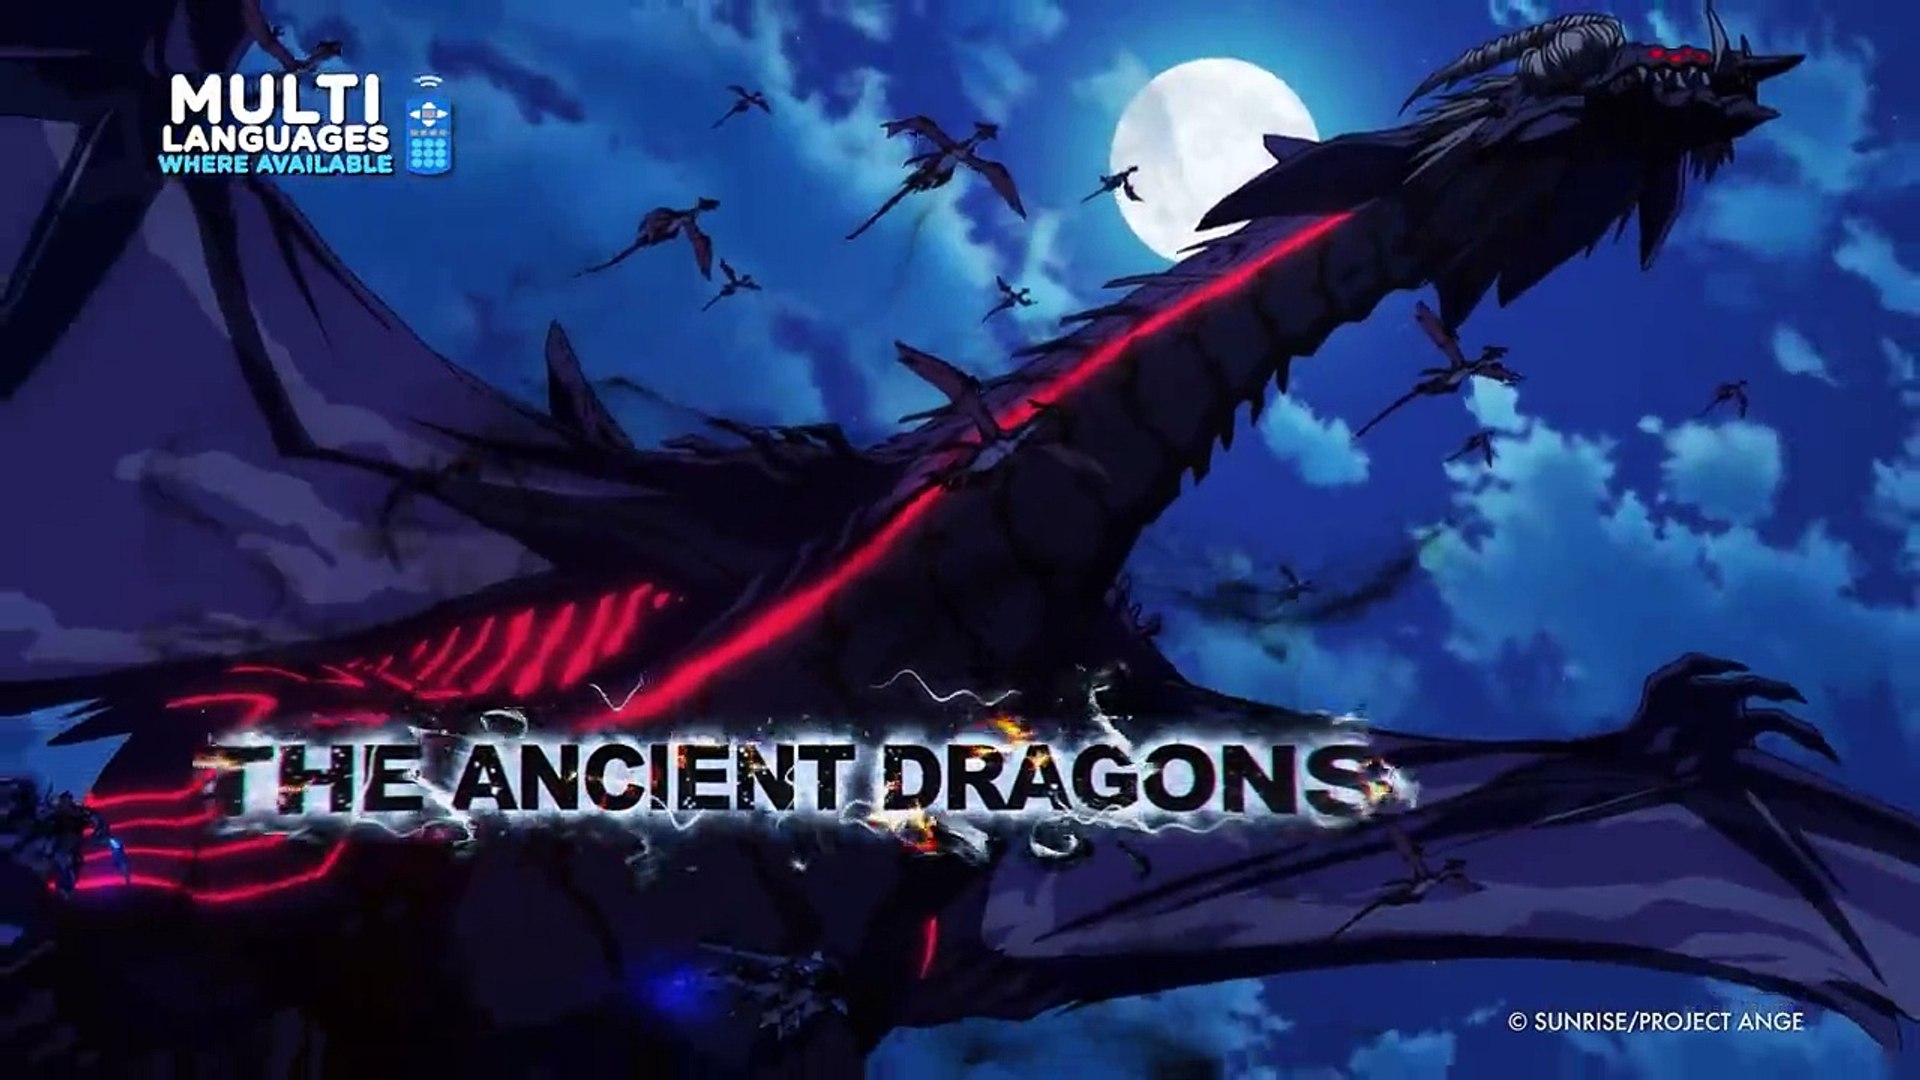 Animax Asia TV on X: CROSS ANGE Rondo of Angel and Dragon ends